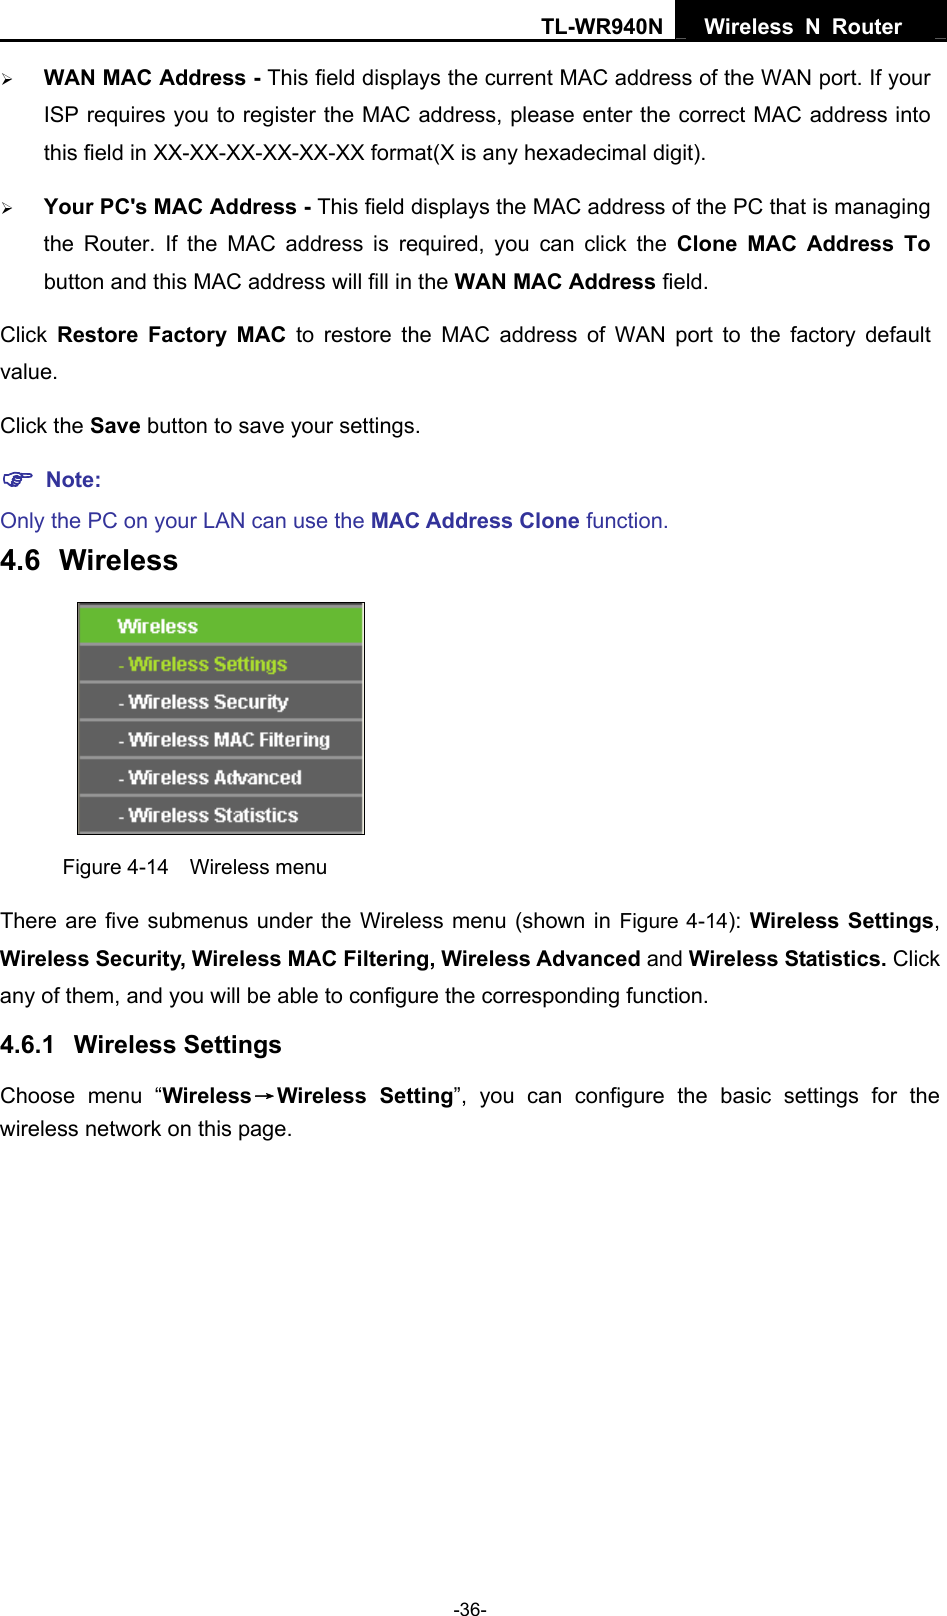 TL-WR940N  Wireless N Router   ¾ WAN MAC Address - This field displays the current MAC address of the WAN port. If your ISP requires you to register the MAC address, please enter the correct MAC address into this field in XX-XX-XX-XX-XX-XX format(X is any hexadecimal digit).   ¾ Your PC&apos;s MAC Address - This field displays the MAC address of the PC that is managing the Router. If the MAC address is required, you can click the Clone MAC Address To button and this MAC address will fill in the WAN MAC Address field. Click  Restore Factory MAC to restore the MAC address of WAN port to the factory default value. Click the Save button to save your settings. ) Note:  Only the PC on your LAN can use the MAC Address Clone function. 4.6  Wireless  Figure 4-14  Wireless menu There are five submenus under the Wireless menu (shown in Figure 4-14): Wireless Settings, Wireless Security, Wireless MAC Filtering, Wireless Advanced and Wireless Statistics. Click any of them, and you will be able to configure the corresponding function.   4.6.1  Wireless Settings Choose menu “Wireless→Wireless Setting”, you can configure the basic settings for the wireless network on this page. -36- 